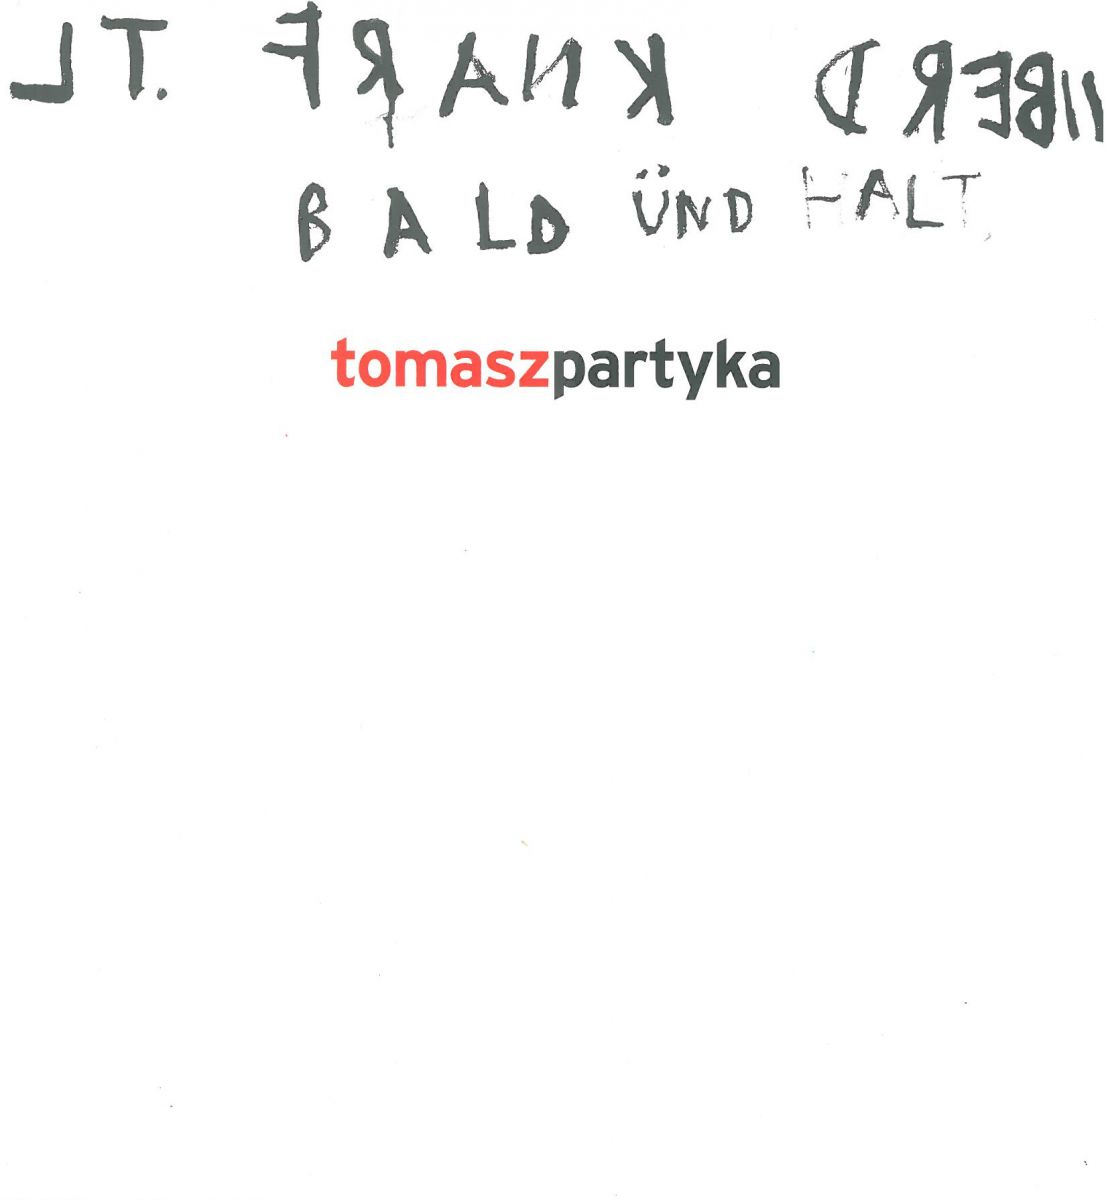 SALE! Tomasz Partyka. Born and bred photo